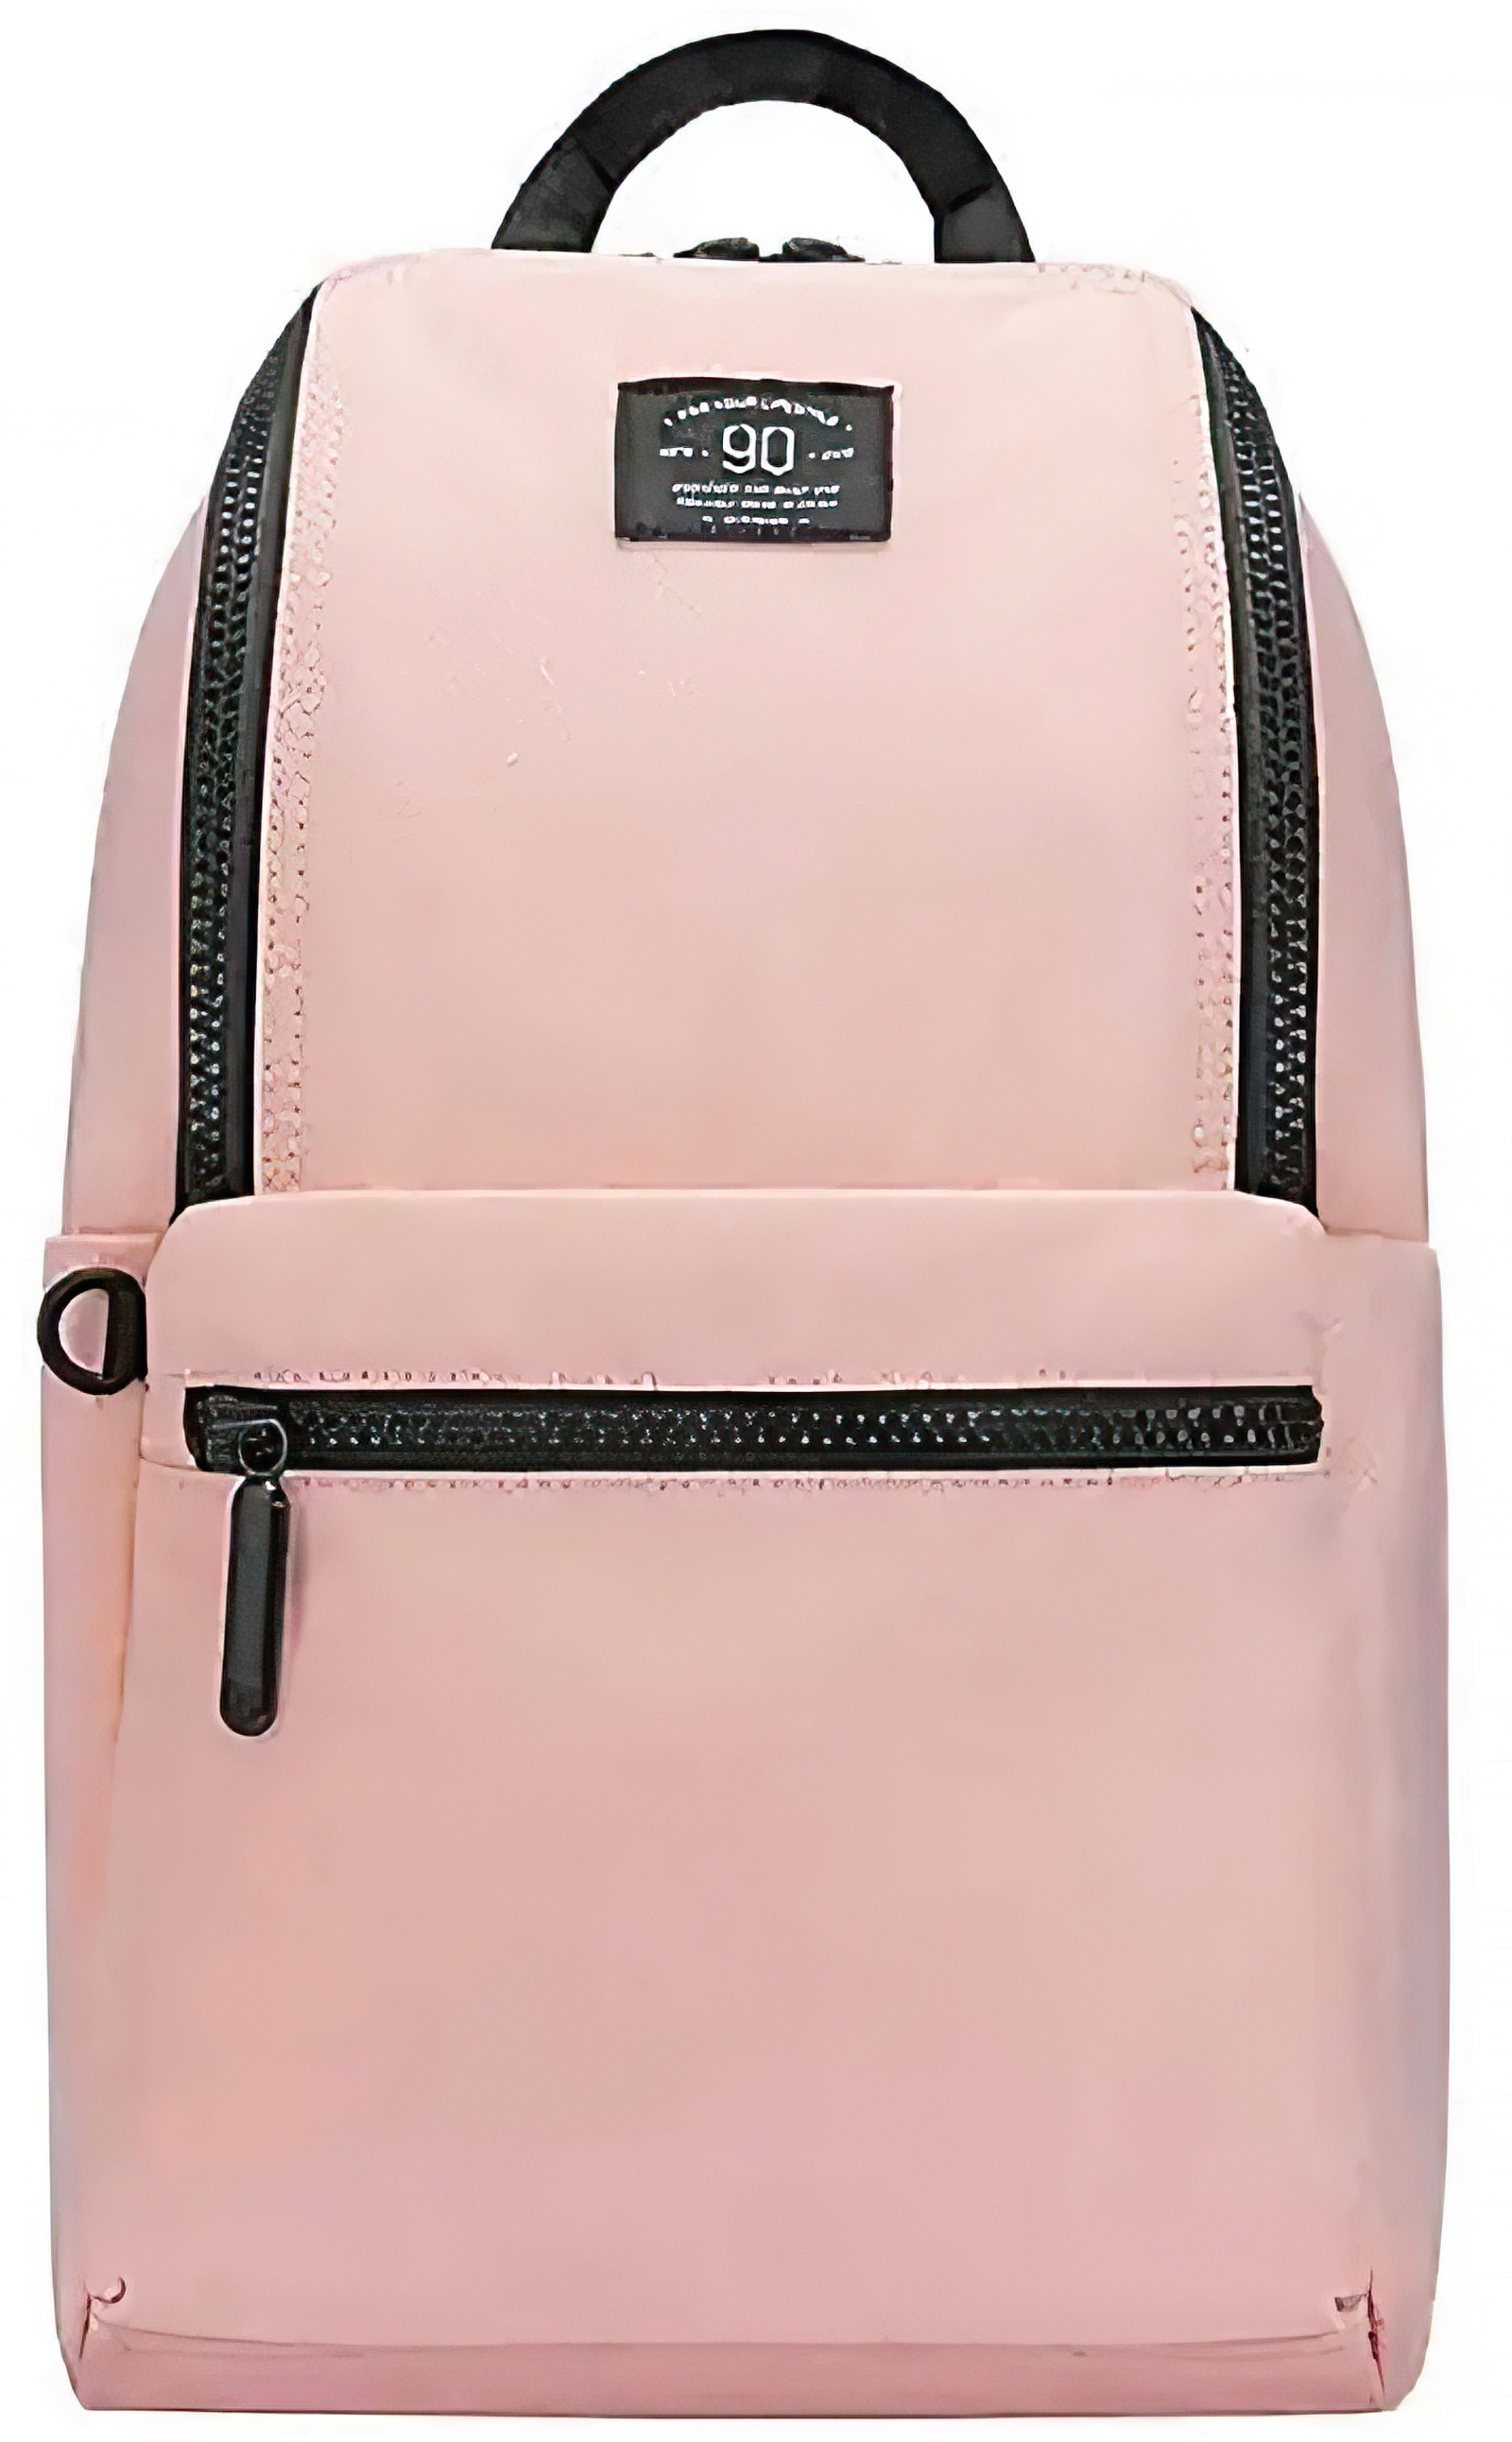 Xiaomi 90 Points Pro Leisure Travel Backpack 10L Pink КАРКАМ